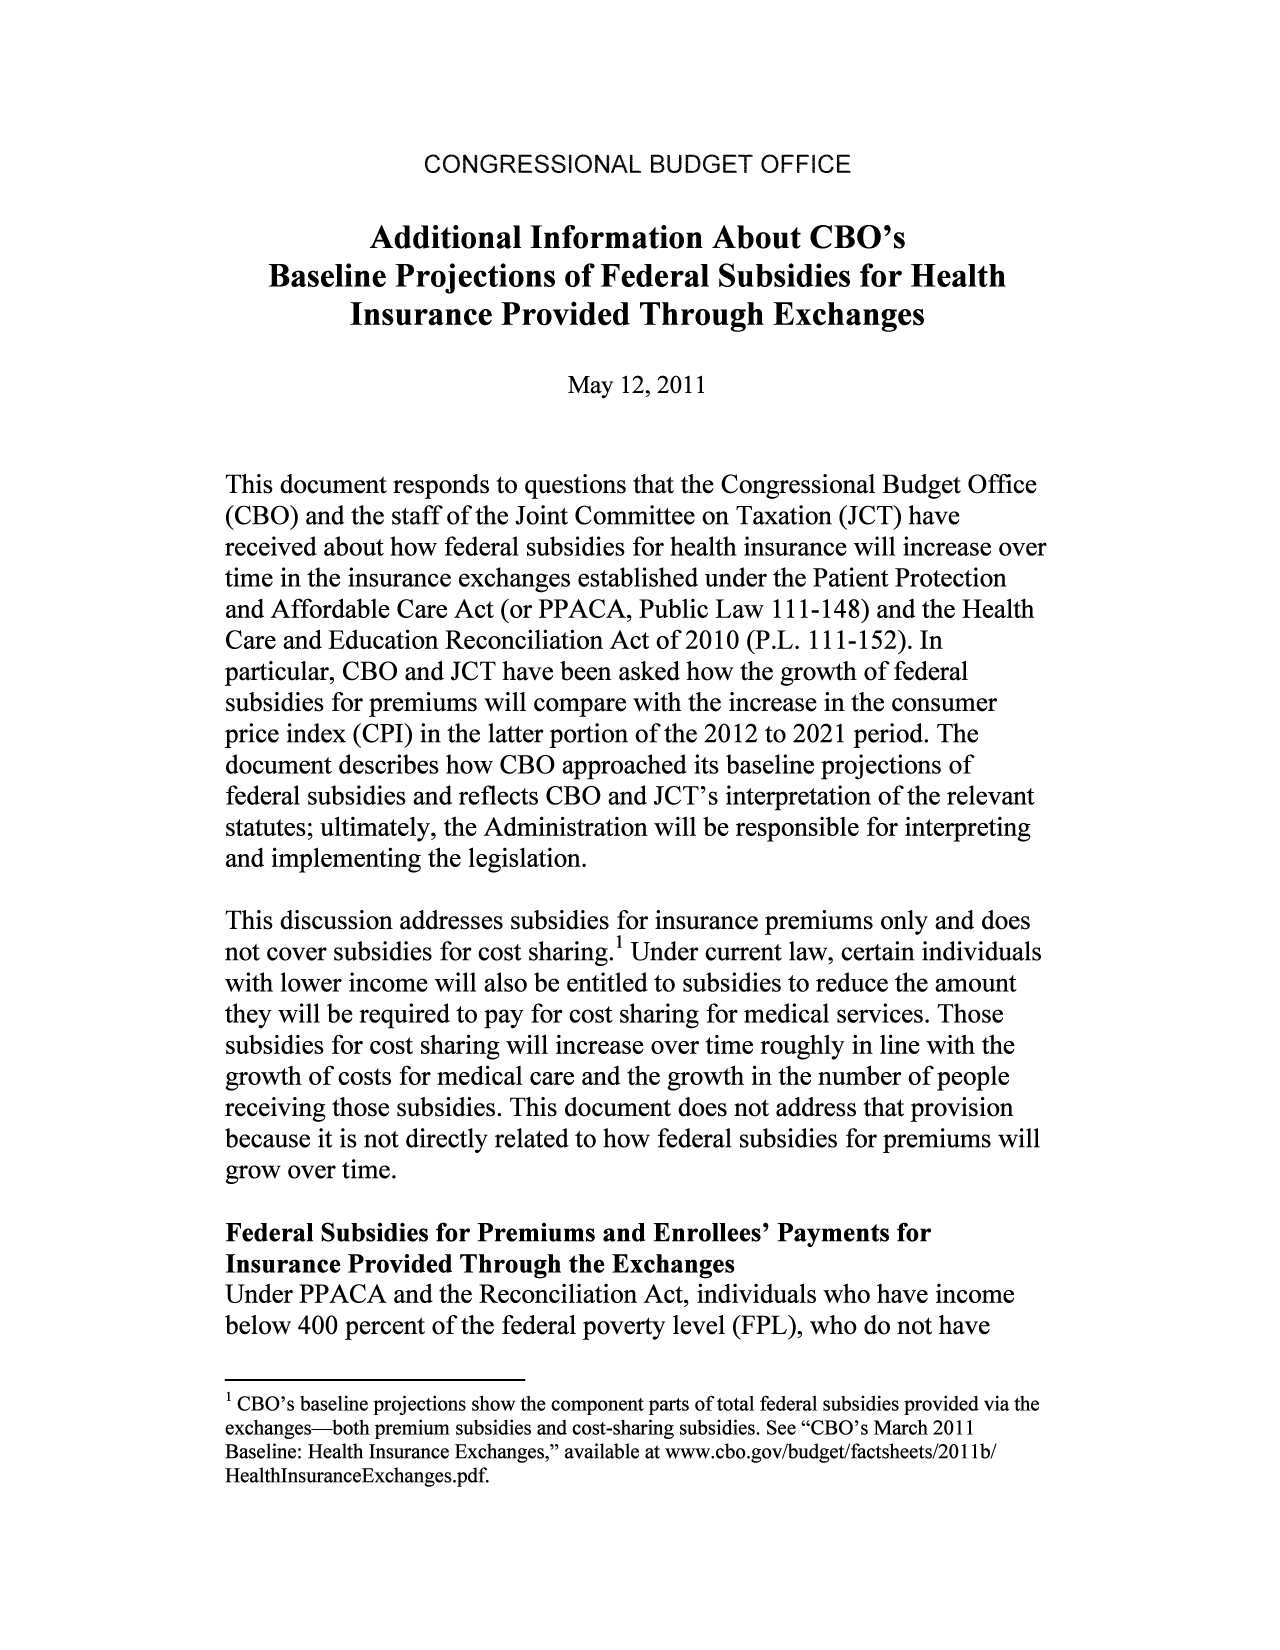 handle is hein.congrec/cbo8021 and id is 1 raw text is: CONGRESSIONAL BUDGET OFFICE

Additional Information About CBO's
Baseline Projections of Federal Subsidies for Health
Insurance Provided Through Exchanges
May 12, 2011
This document responds to questions that the Congressional Budget Office
(CBO) and the staff of the Joint Committee on Taxation (JCT) have
received about how federal subsidies for health insurance will increase over
time in the insurance exchanges established under the Patient Protection
and Affordable Care Act (or PPACA, Public Law 111-148) and the Health
Care and Education Reconciliation Act of 2010 (P.L. 111-152). In
particular, CBO and JCT have been asked how the growth of federal
subsidies for premiums will compare with the increase in the consumer
price index (CPI) in the latter portion of the 2012 to 2021 period. The
document describes how CBO approached its baseline projections of
federal subsidies and reflects CBO and JCT's interpretation of the relevant
statutes; ultimately, the Administration will be responsible for interpreting
and implementing the legislation.
This discussion addresses subsidies for insurance premiums only and does
not cover subsidies for cost sharing. Under current law, certain individuals
with lower income will also be entitled to subsidies to reduce the amount
they will be required to pay for cost sharing for medical services. Those
subsidies for cost sharing will increase over time roughly in line with the
growth of costs for medical care and the growth in the number of people
receiving those subsidies. This document does not address that provision
because it is not directly related to how federal subsidies for premiums will
grow over time.
Federal Subsidies for Premiums and Enrollees' Payments for
Insurance Provided Through the Exchanges
Under PPACA and the Reconciliation Act, individuals who have income
below 400 percent of the federal poverty level (FPL), who do not have
1 CBO's baseline projections show the component parts of total federal subsidies provided via the
exchanges-both premium subsidies and cost-sharing subsidies. See CBO's March 2011
Baseline: Health Insurance Exchanges, available at www.cbo.gov/budget/factsheets/2011ib/
HealthlnsuranceExchanges.pdf.


